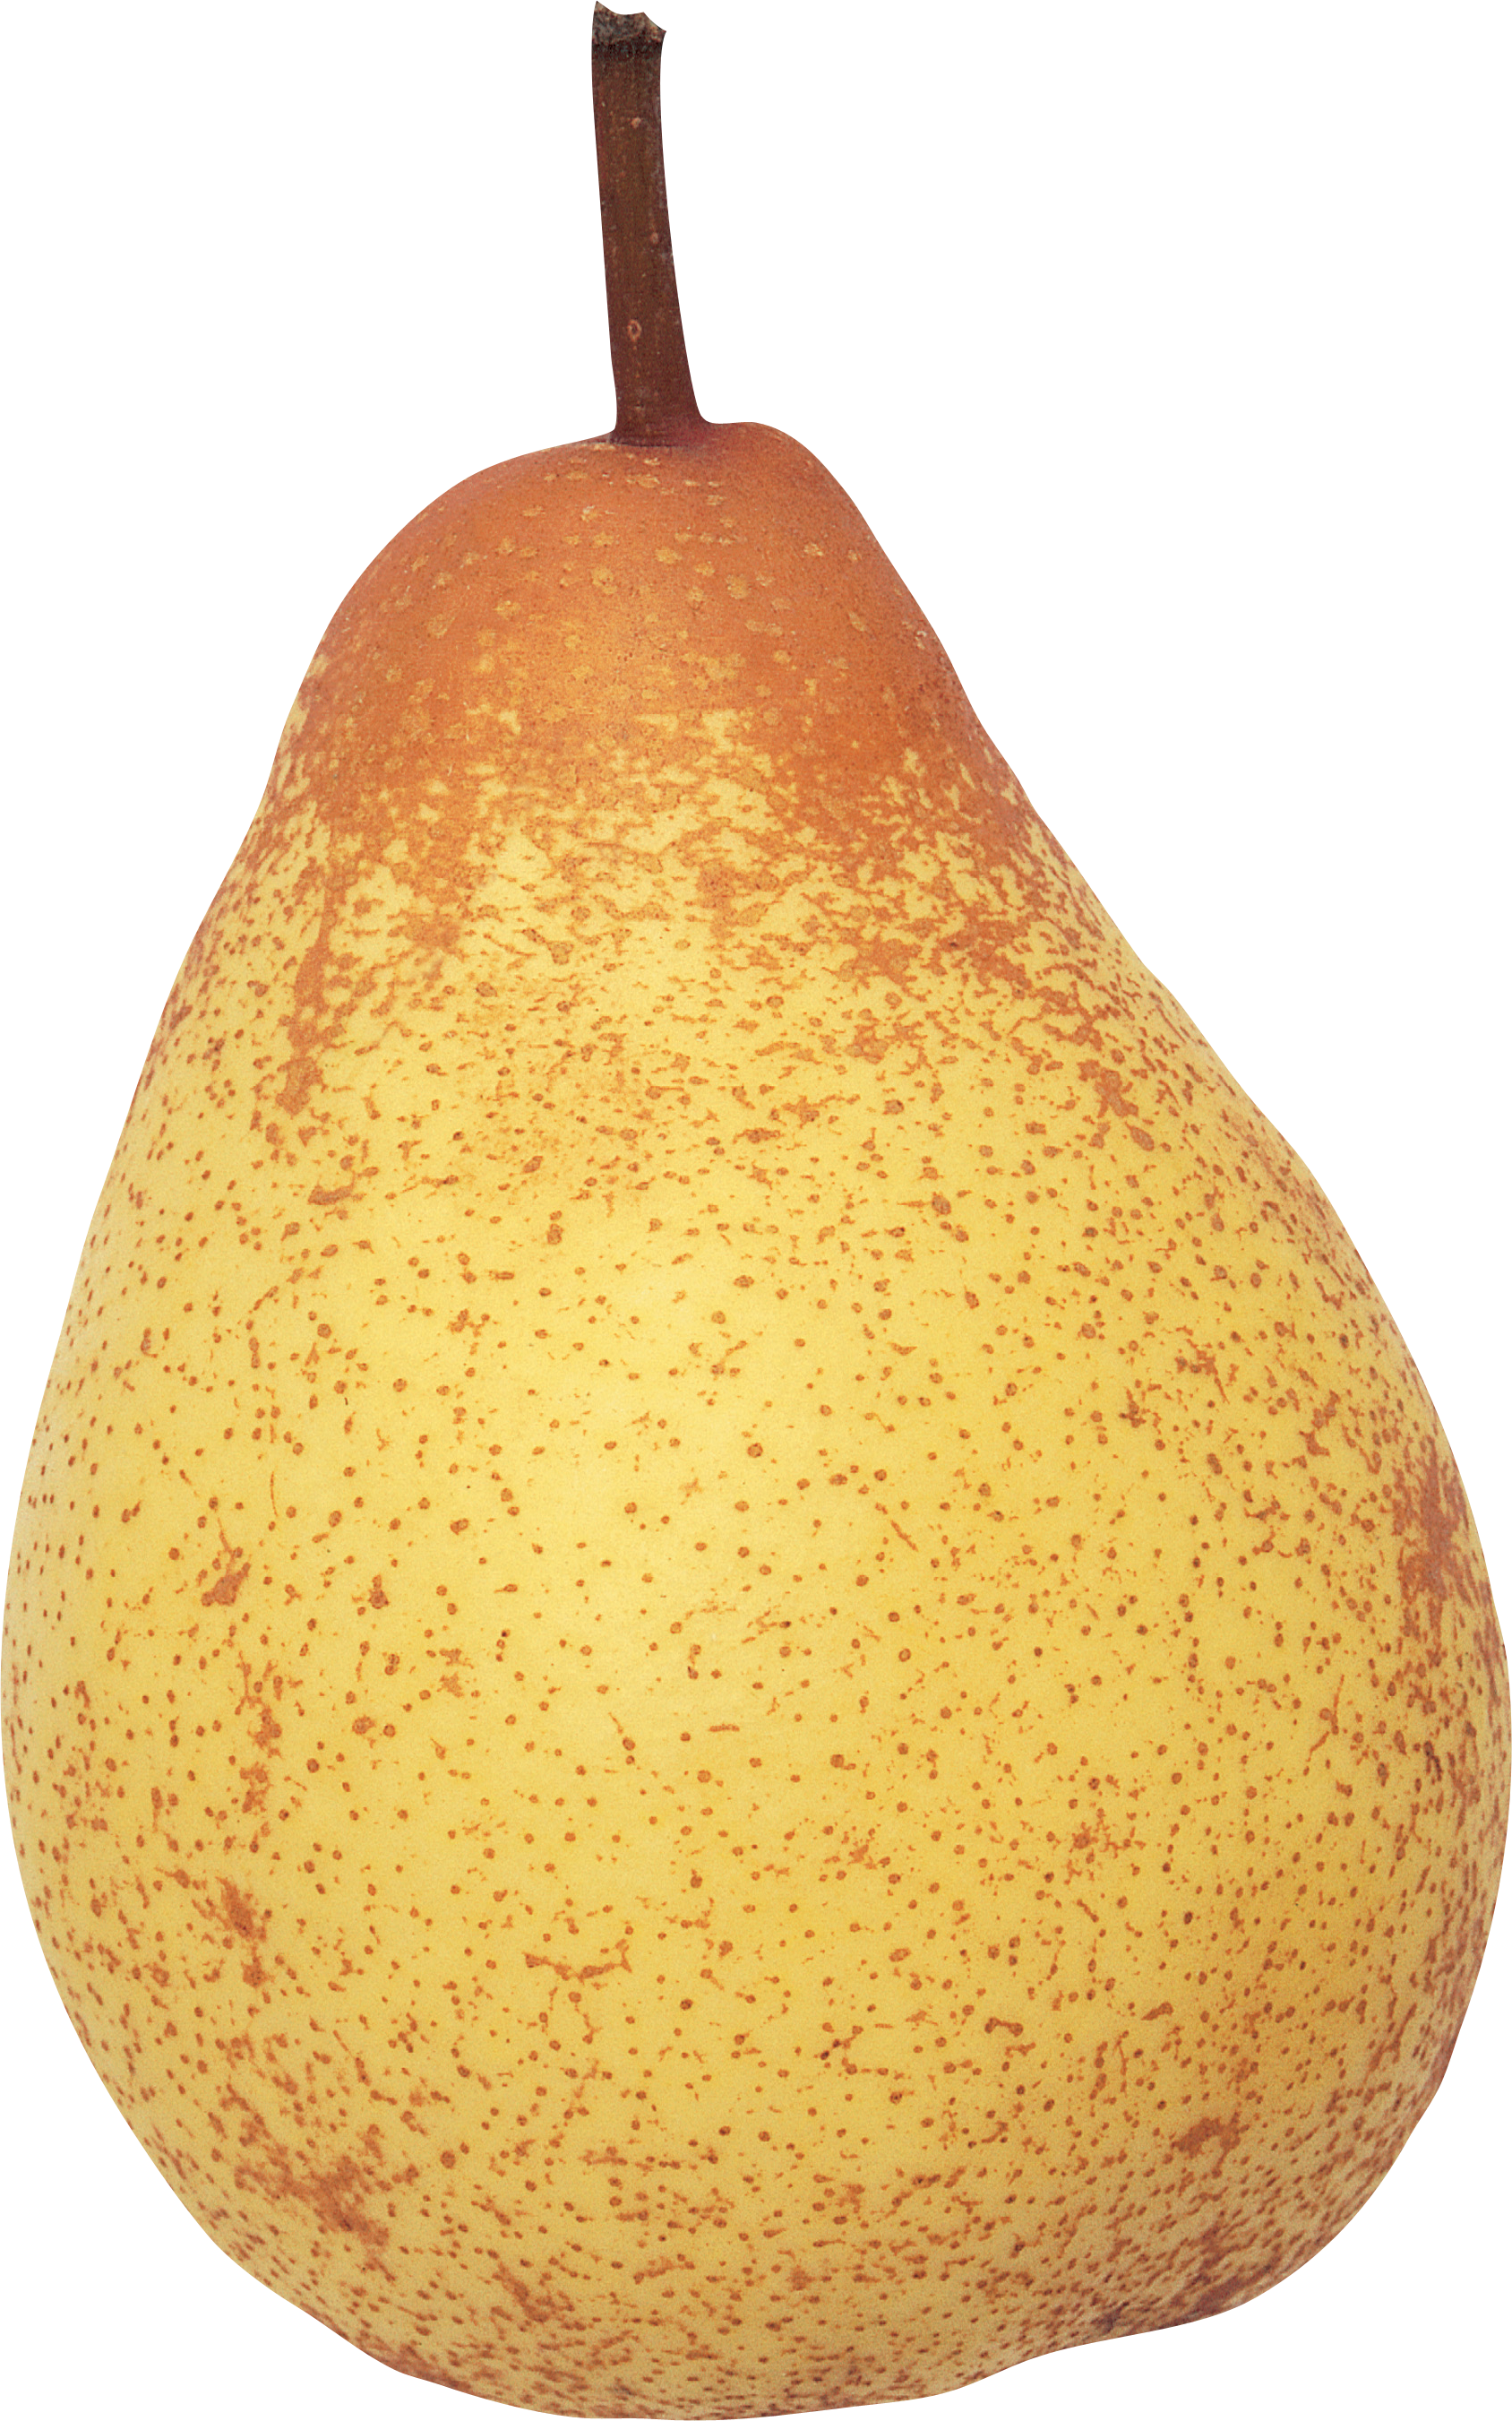 Pear PNG image free Download